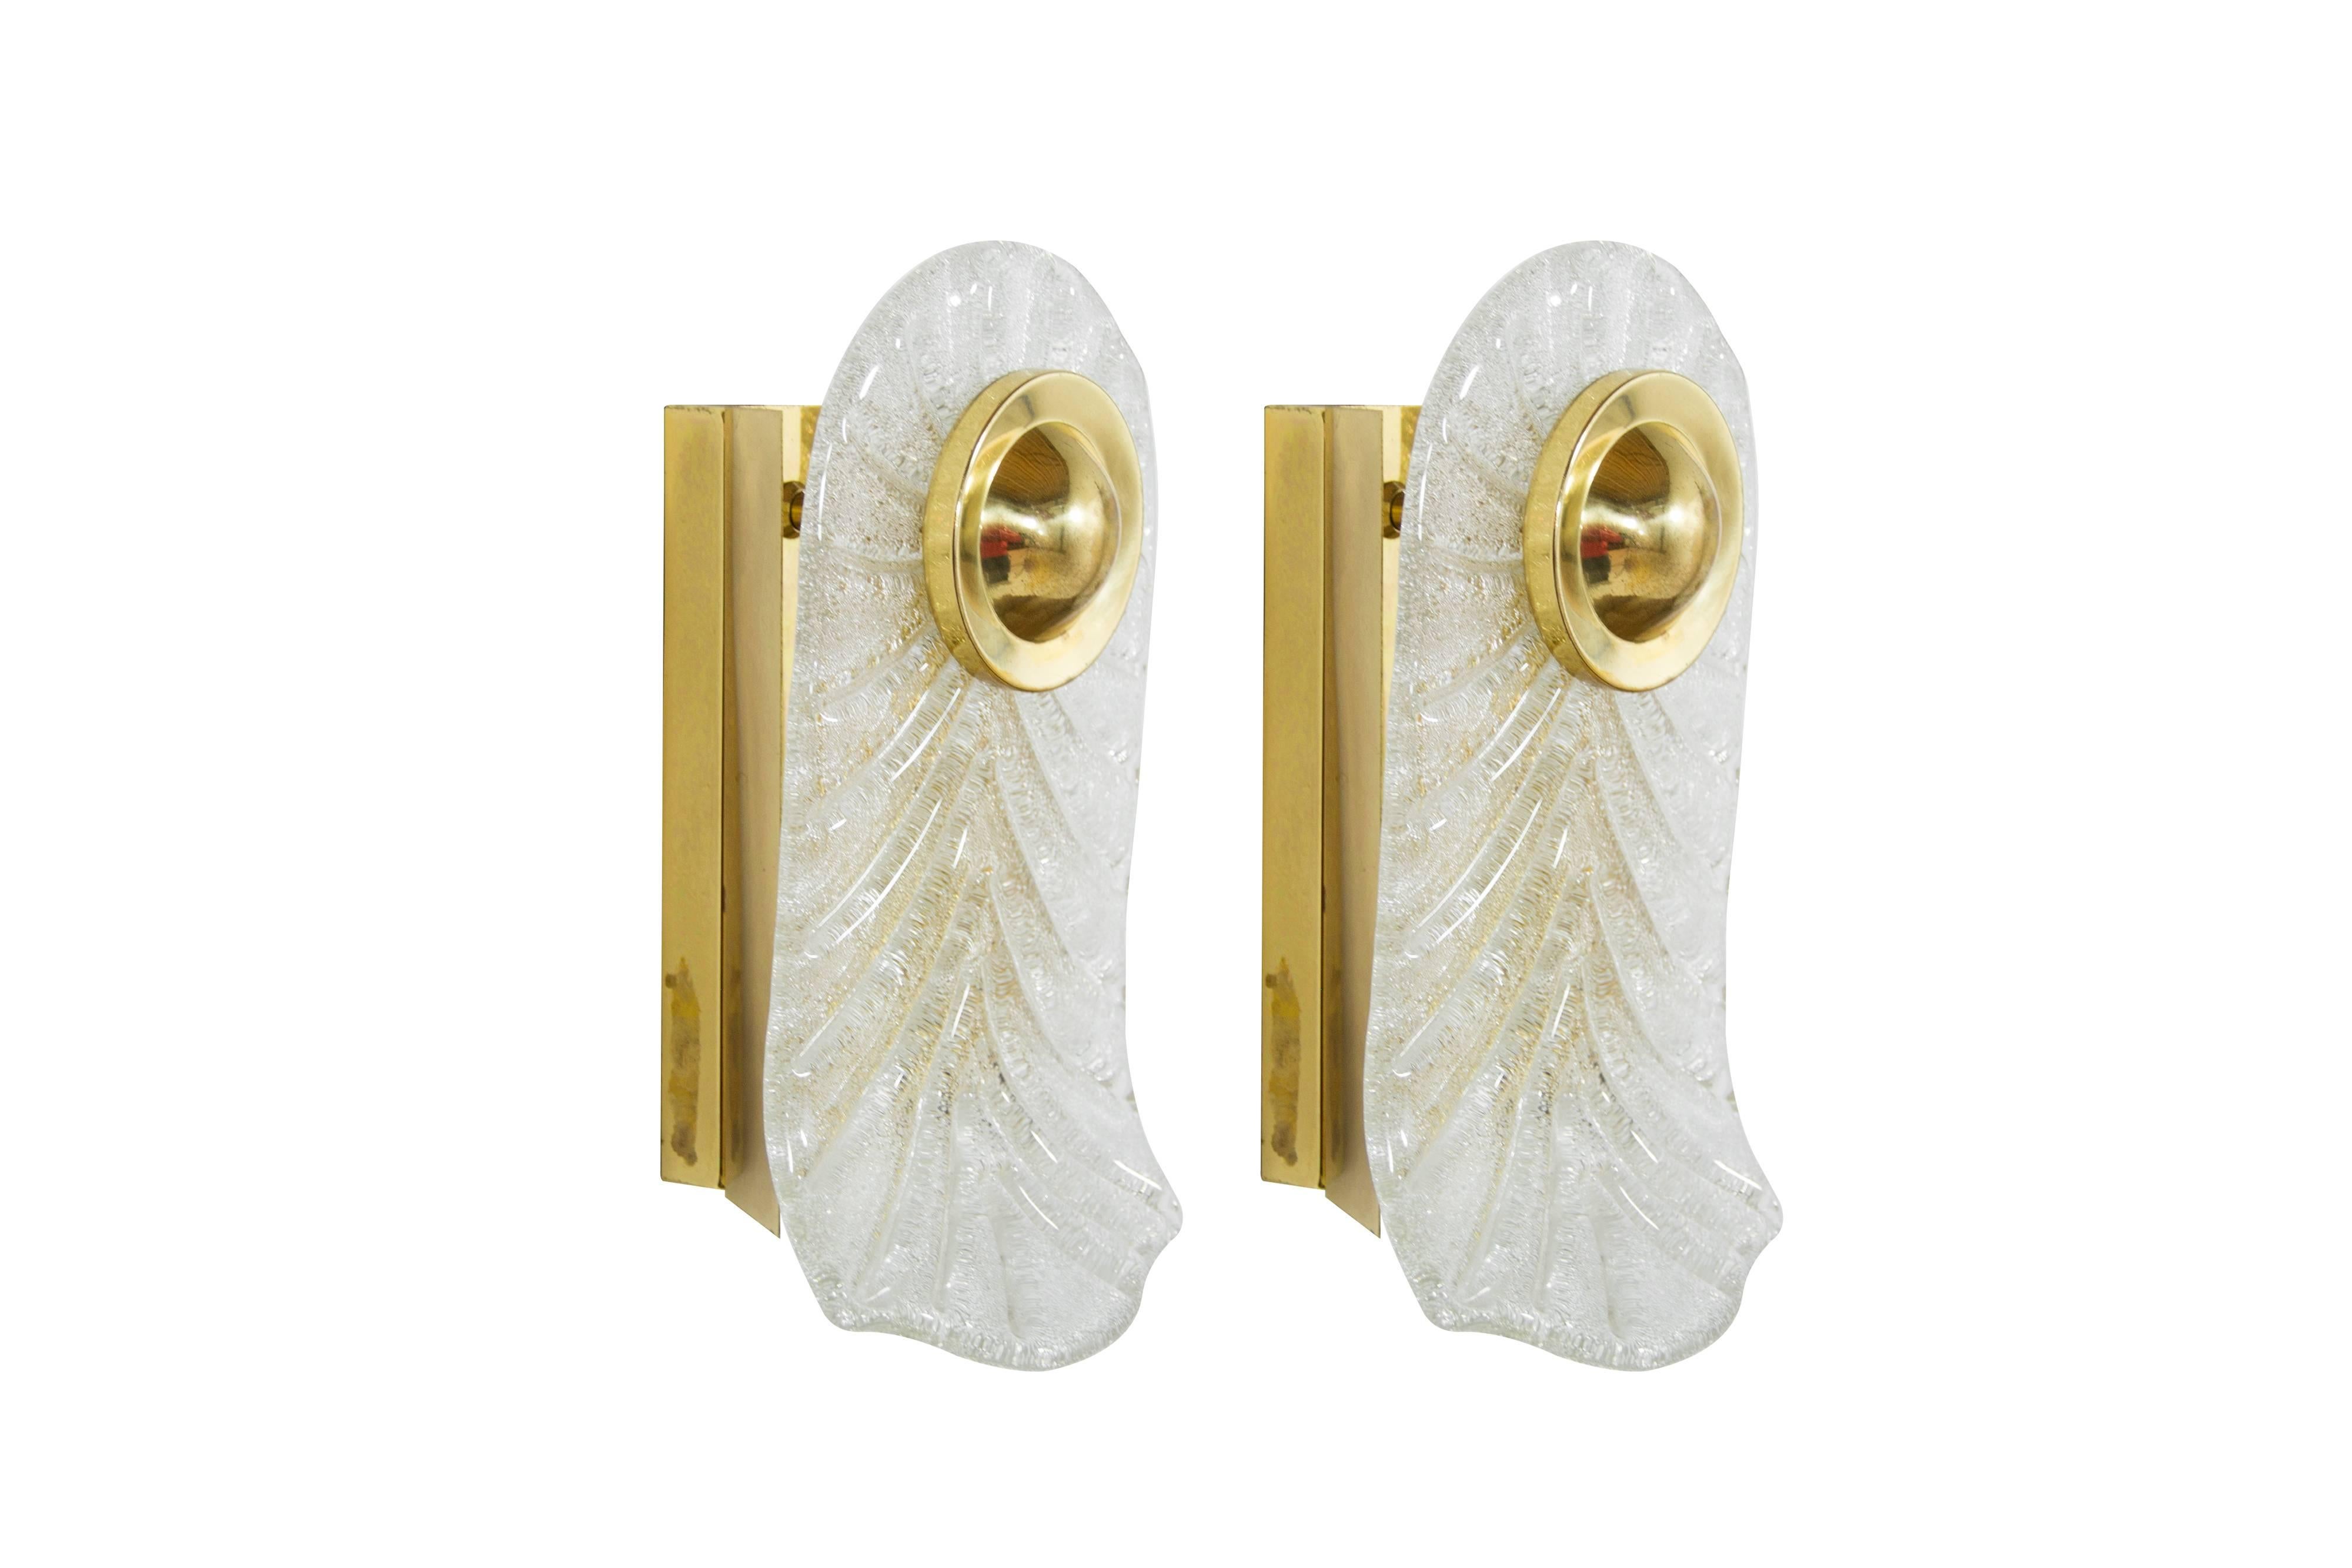 Gorgeous pair of sconces or wall lamps attributed to Barovier & Toso, Italy, circa 1950s. Fully rewired, UL listed and fitted with American sockets.
